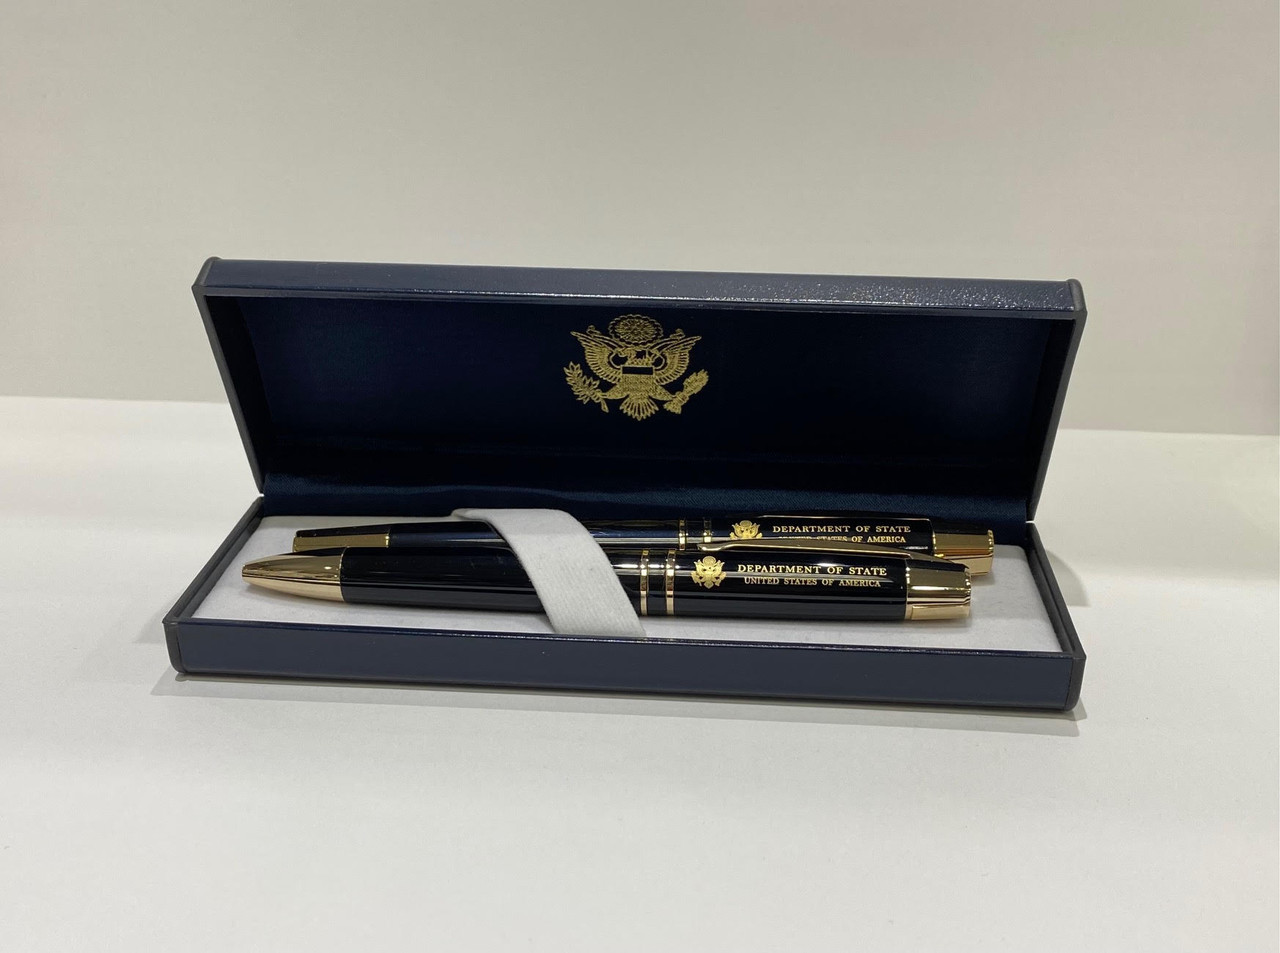 https://cdn11.bigcommerce.com/s-arjpz/images/stencil/1280x1280/products/3059/3577/Image_Set_of_2_Exec._Black_Lacquer_Gold_accents_BP_RB_Pen_Box__40100.1614766023.jpg?c=2?imbypass=on